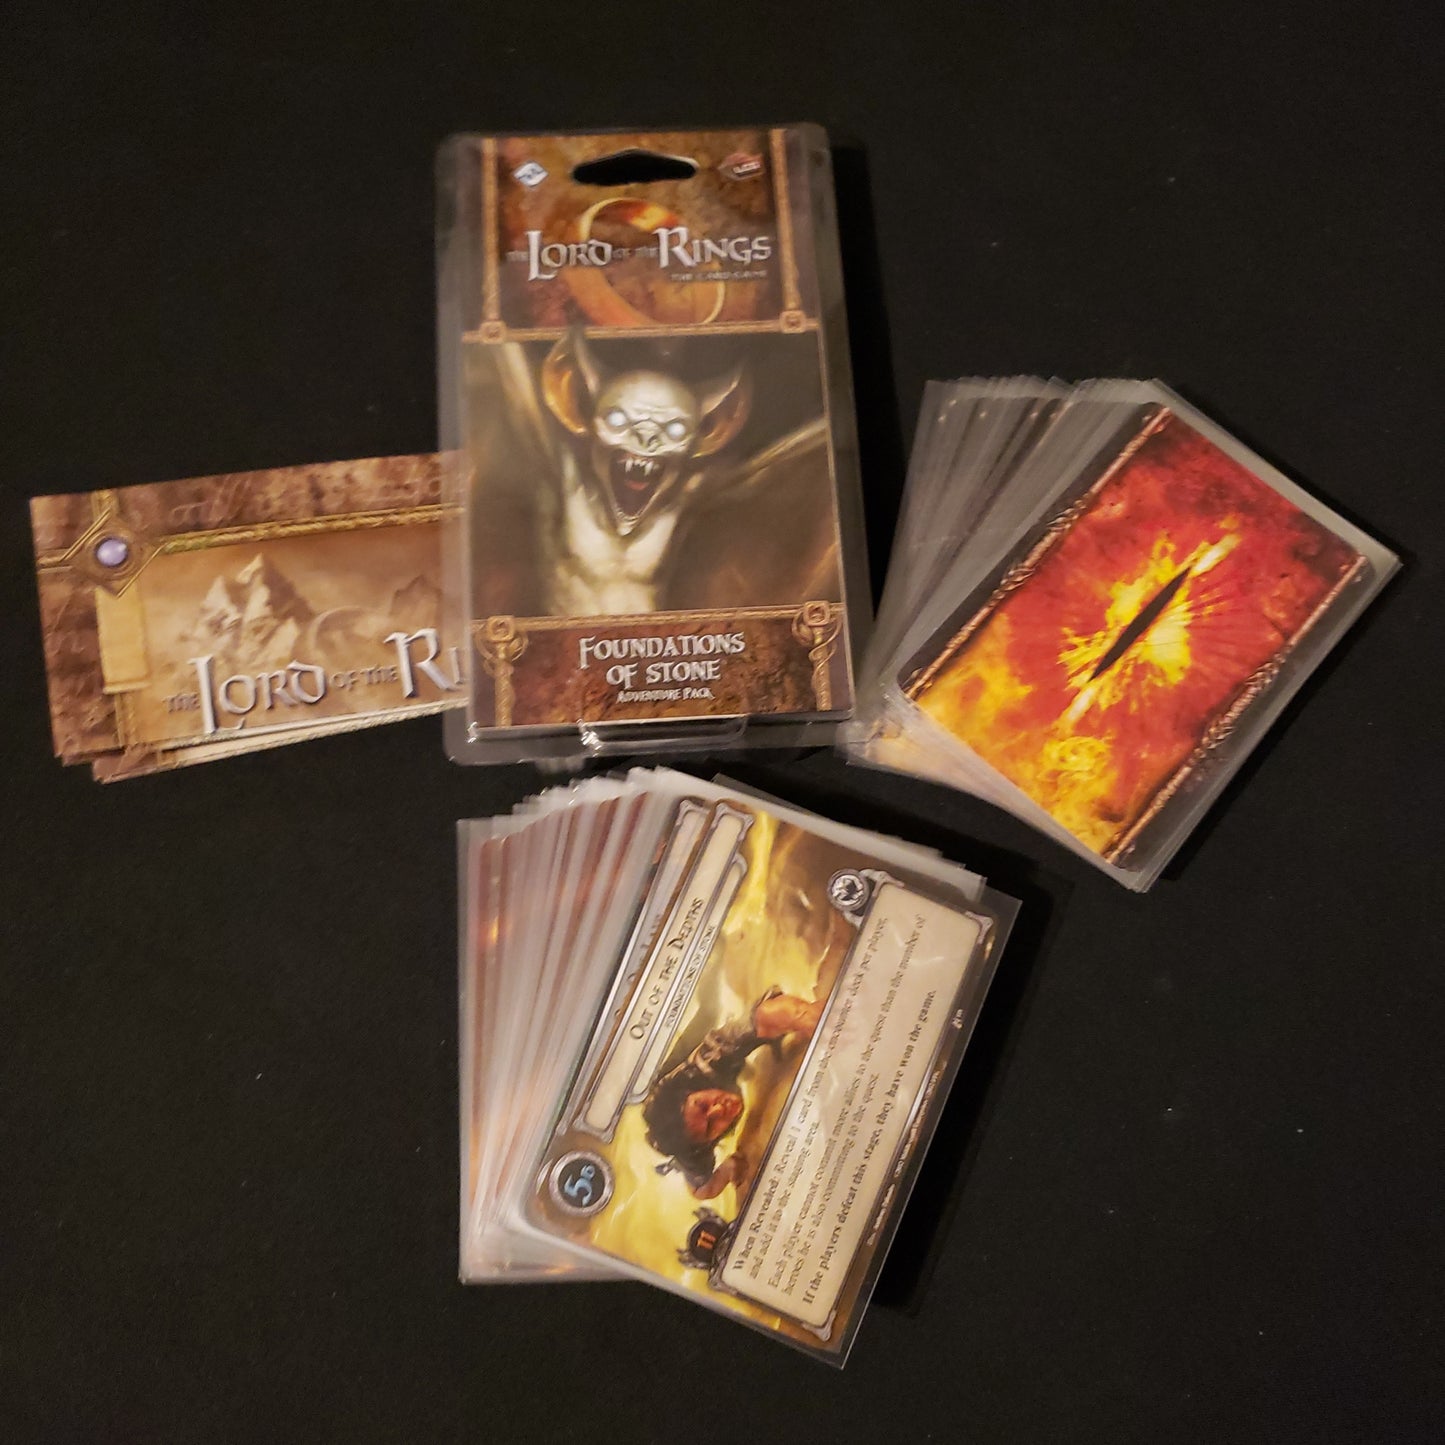 Image shows the front of the package for the Foundations of Stone Adventure Pack for the Lord of the Rings card game, with the cards and instructions fanned out around it